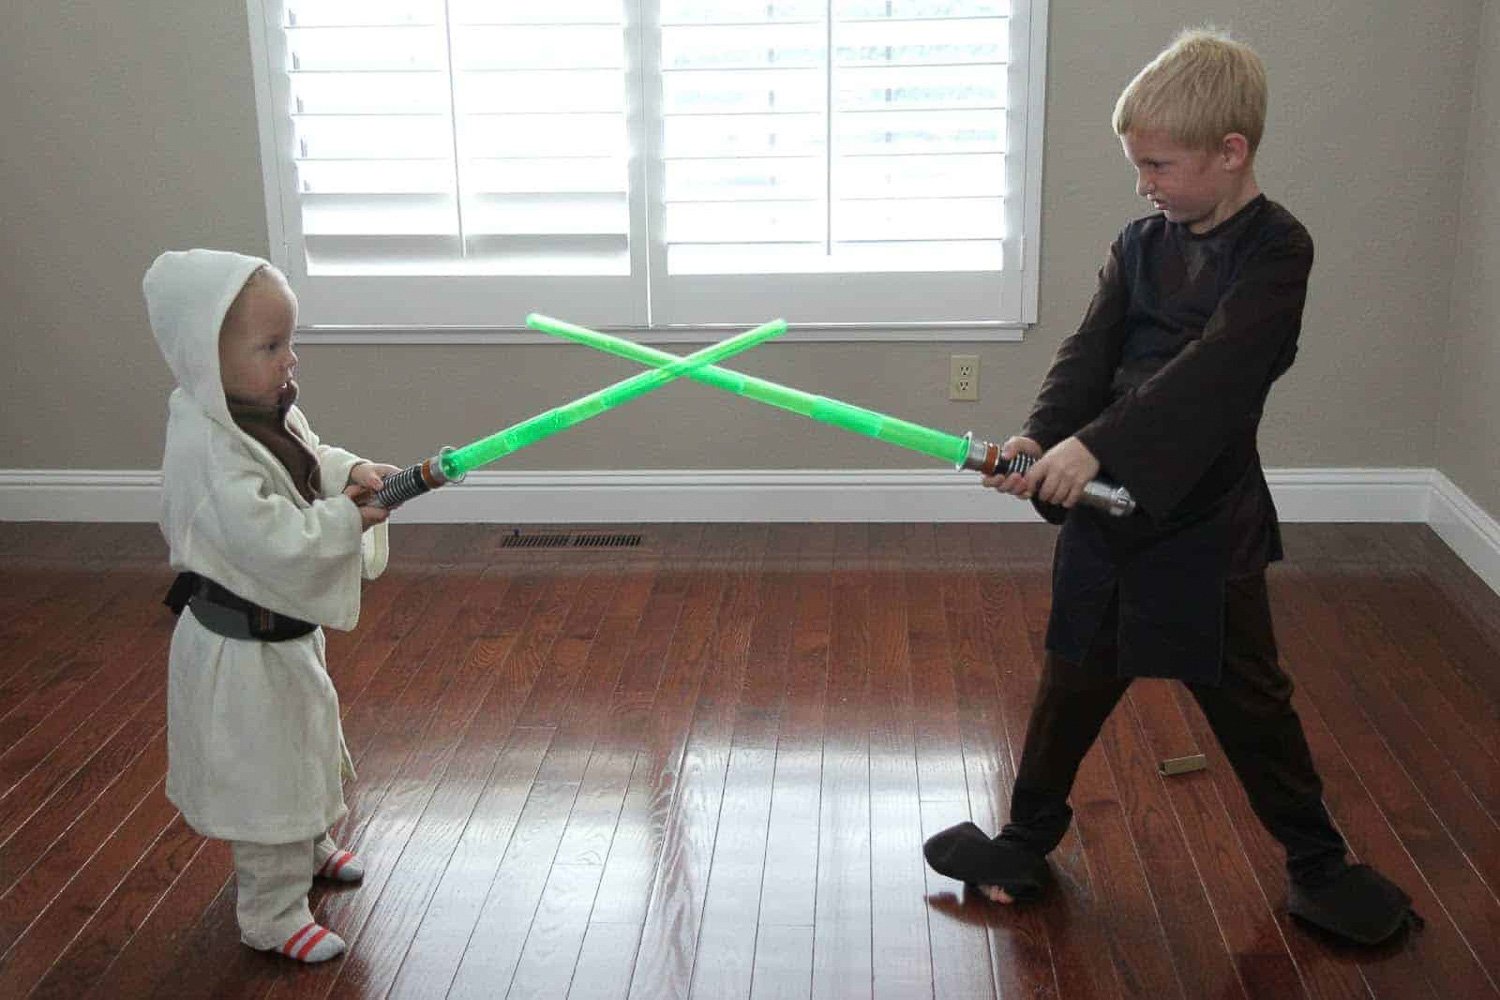 Two boys playing inside with toy lightsabers